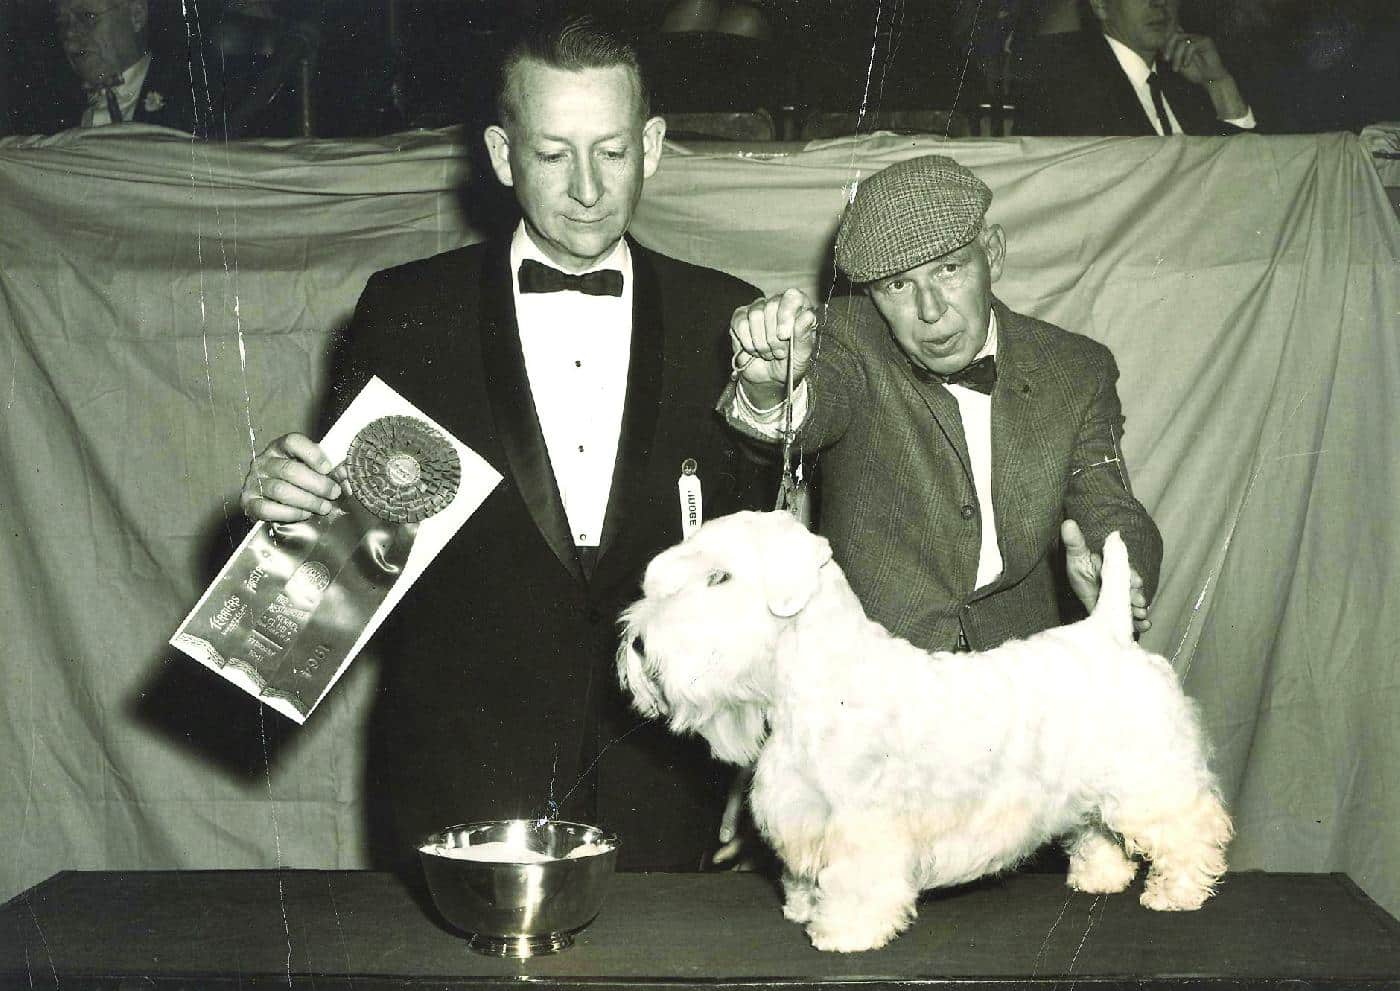 Black and white photo of a Sealyham Terrier at a dog show